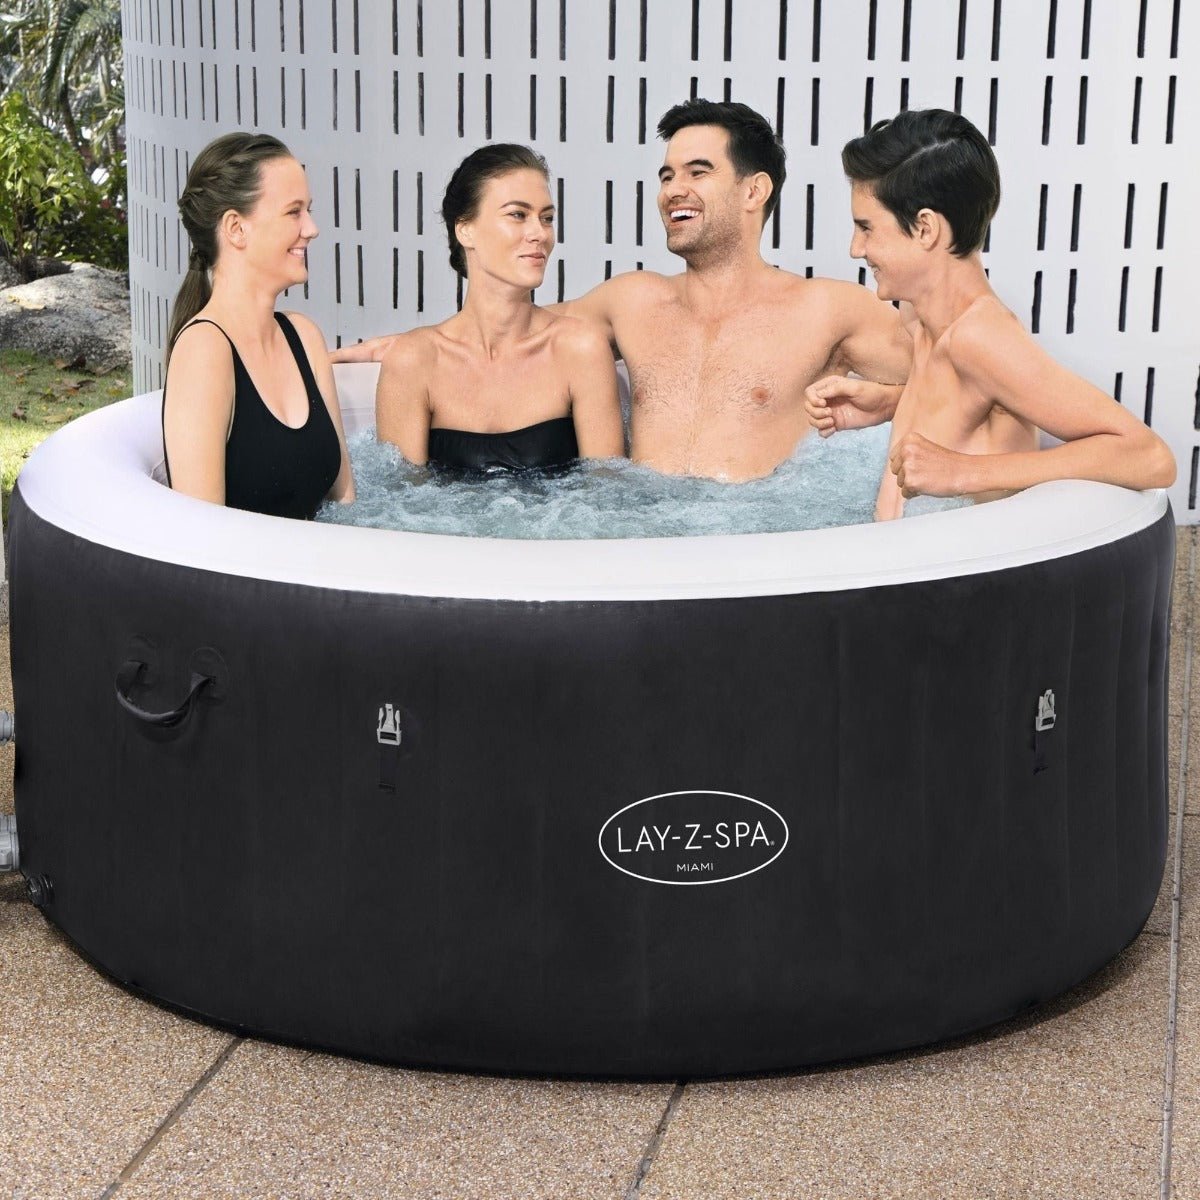 Lay-Z-Spa 71in x 26in Miami AirJet Inflatable Hot Tub Spa – BW60001